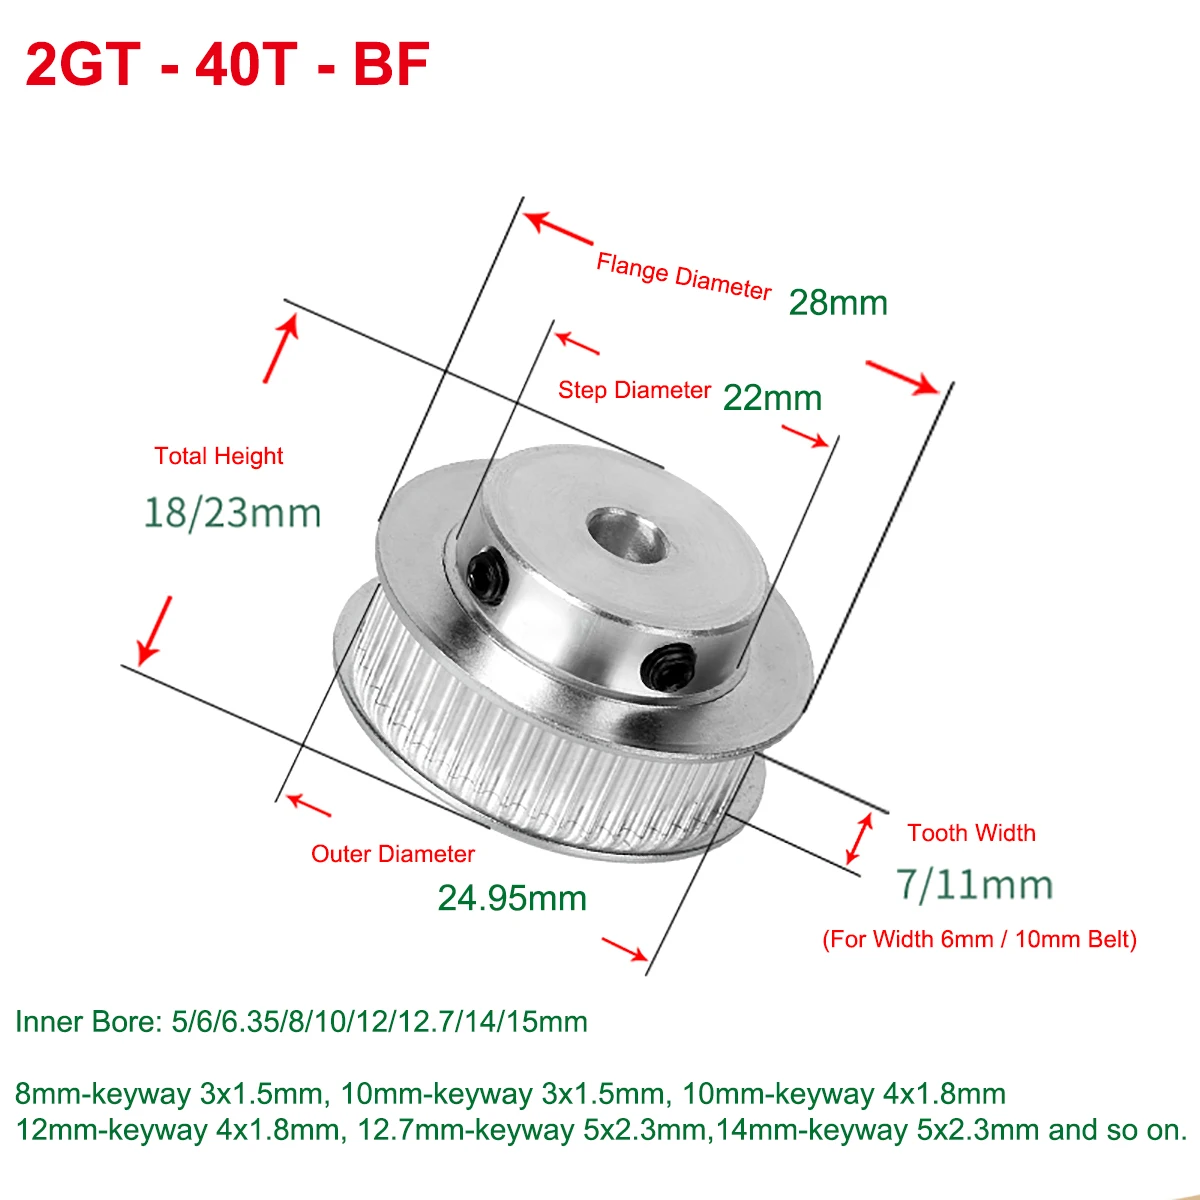 40T 2GT Synchronous Timing Pulley Bore 5/6/6.35/8/10/12/12.7/14/15mm For Width 6/10mm BF keyway GT2 Timing Belt 3D Printer Parts